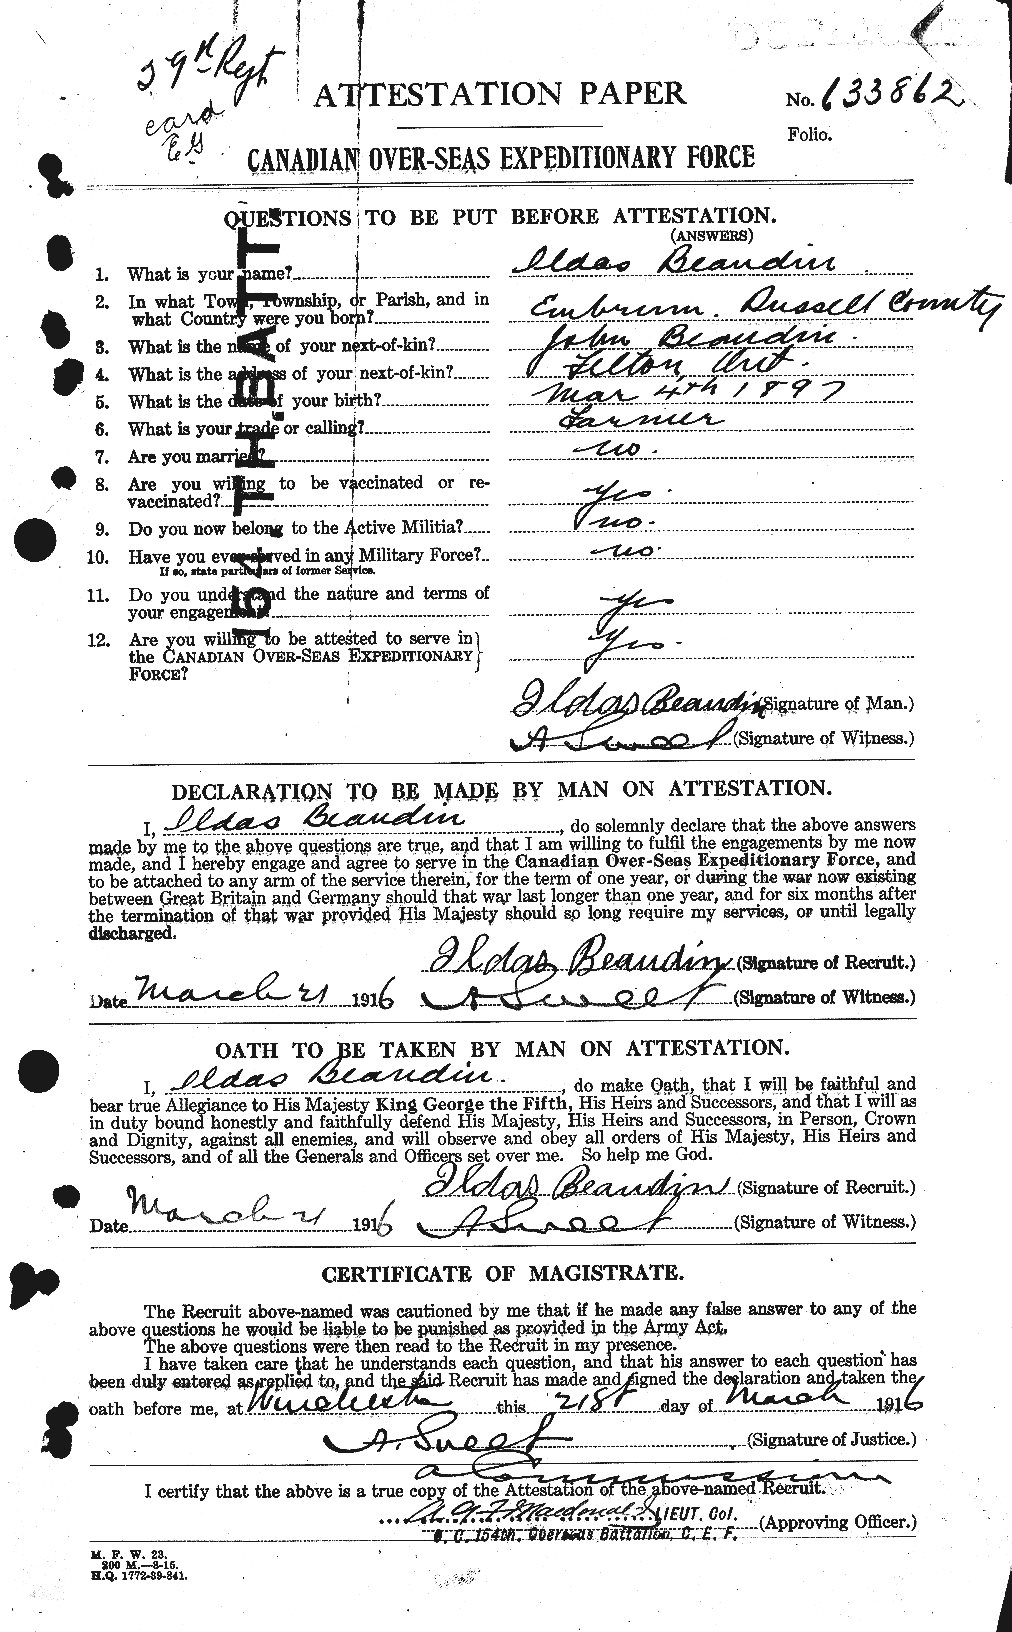 Personnel Records of the First World War - CEF 231170a